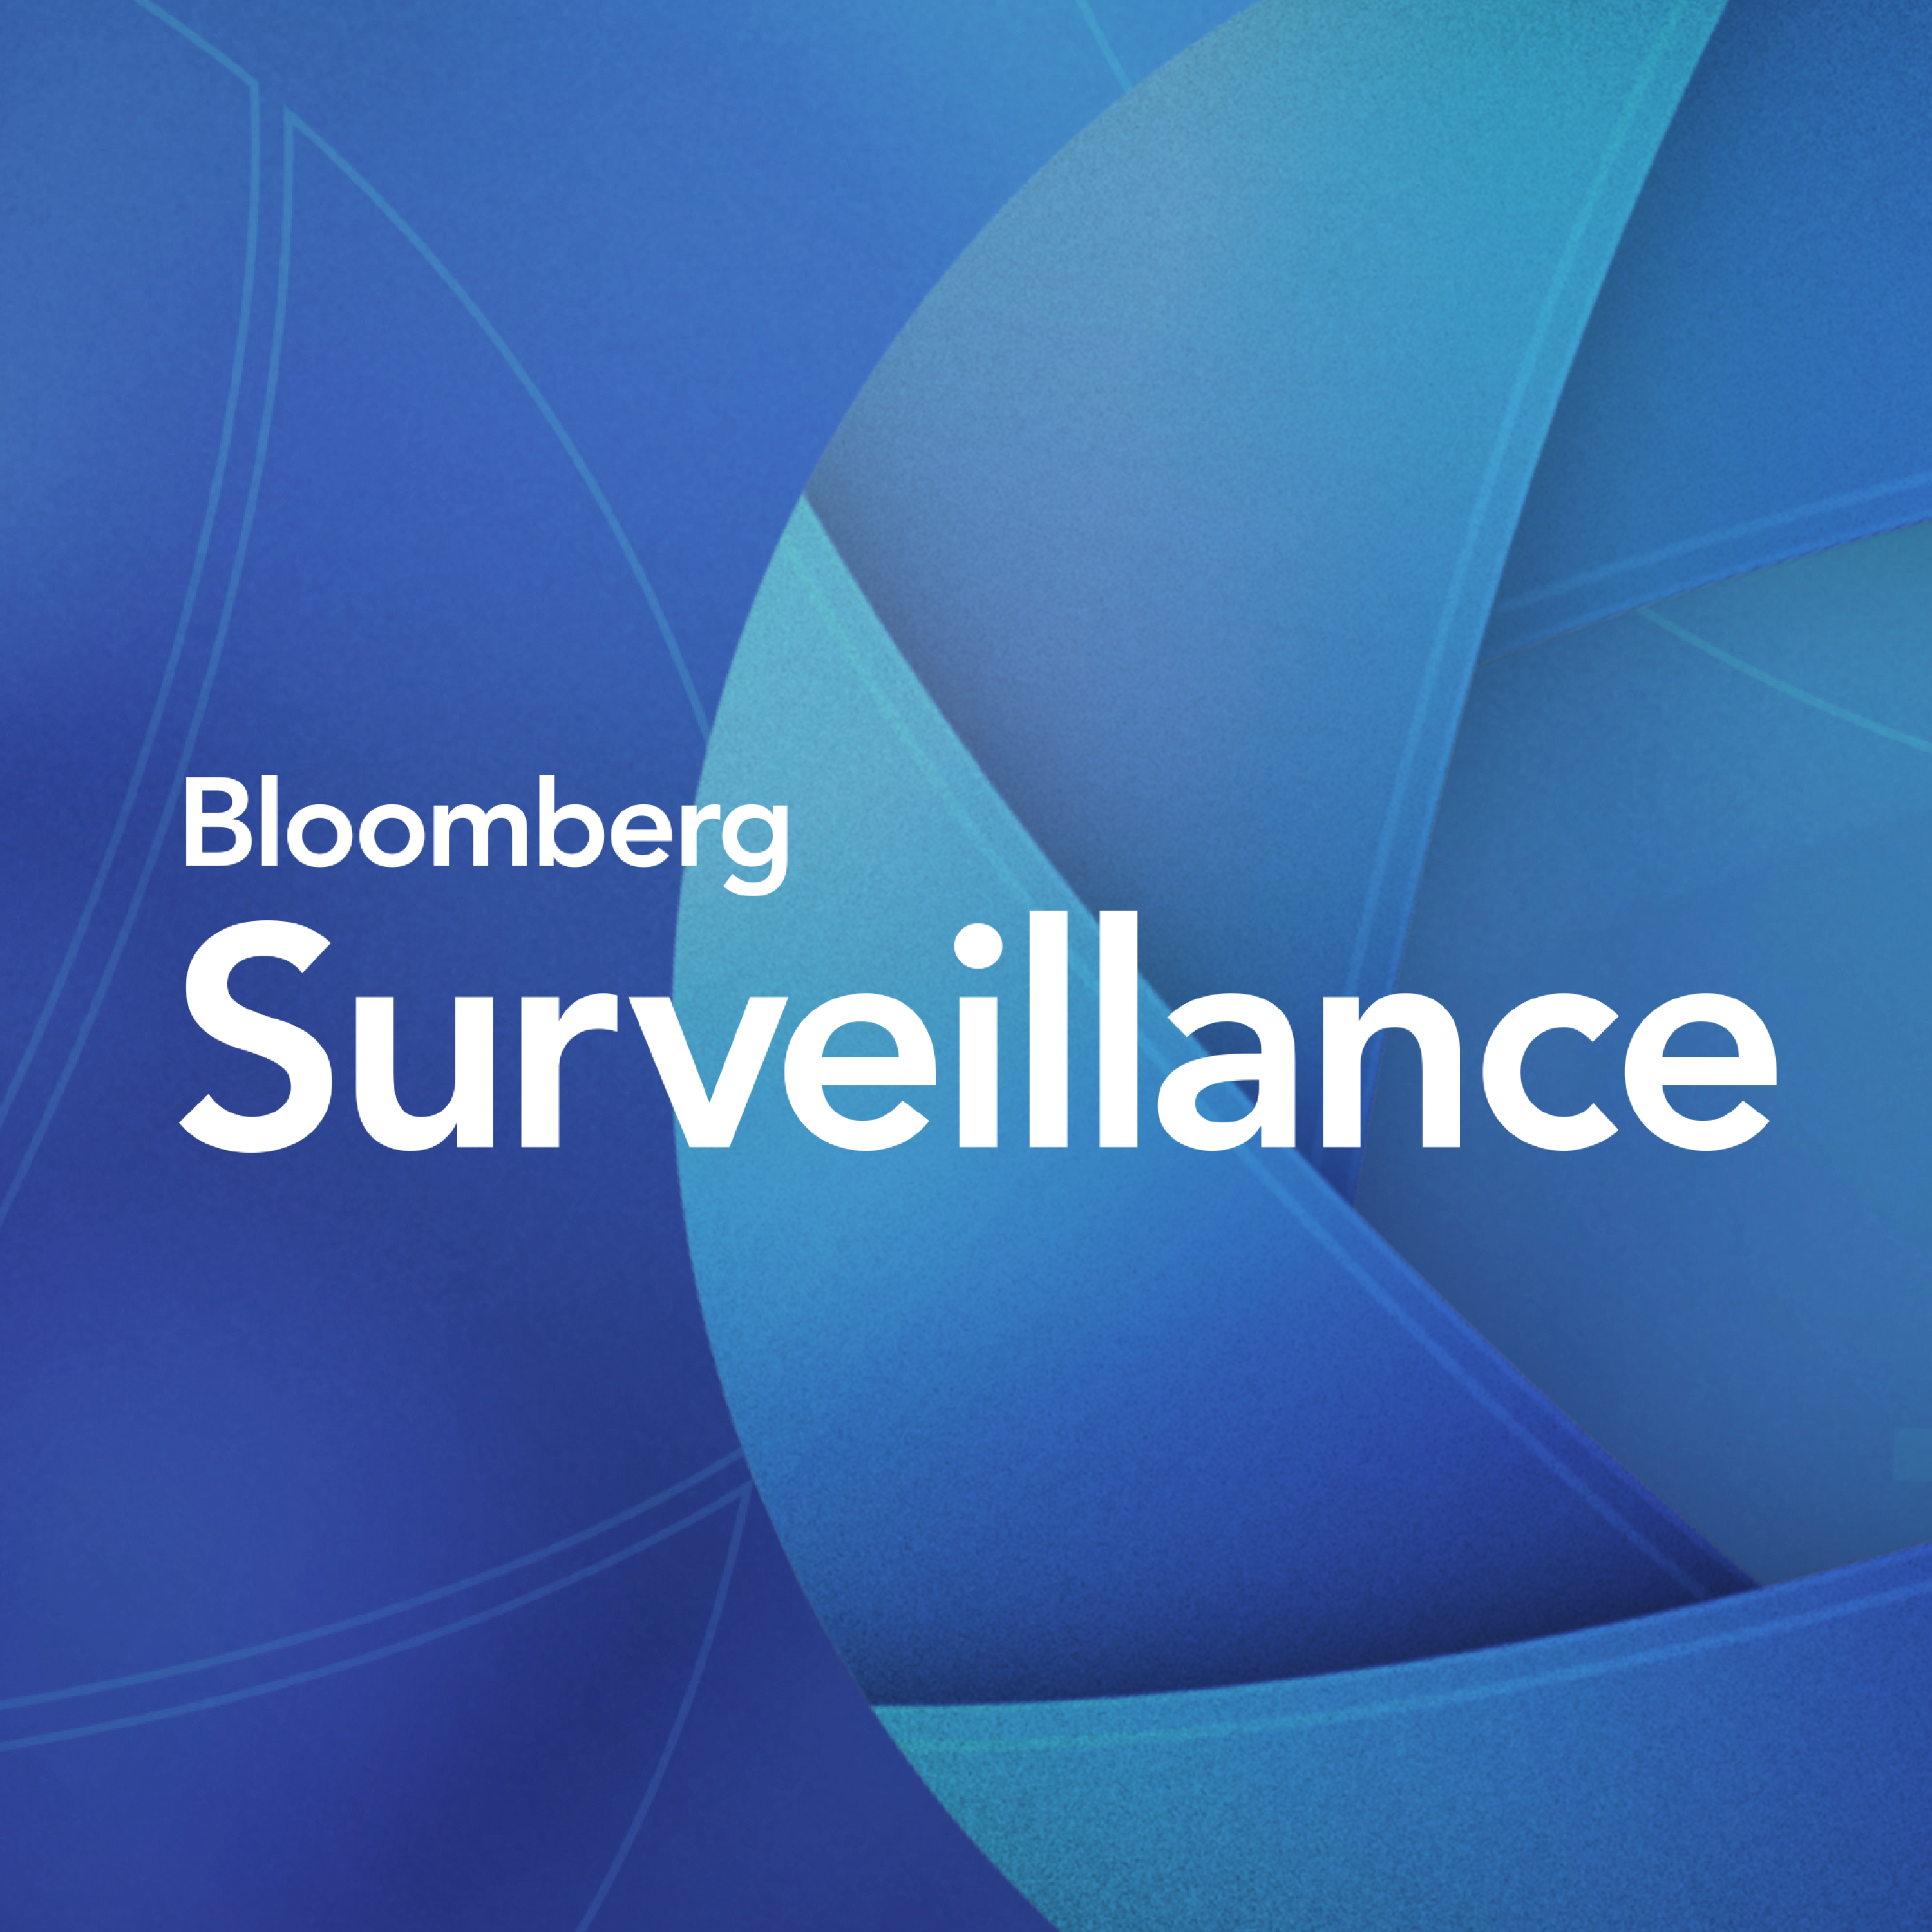 Surveillance: Closer To W-Shaped Recovery, Swonk Says